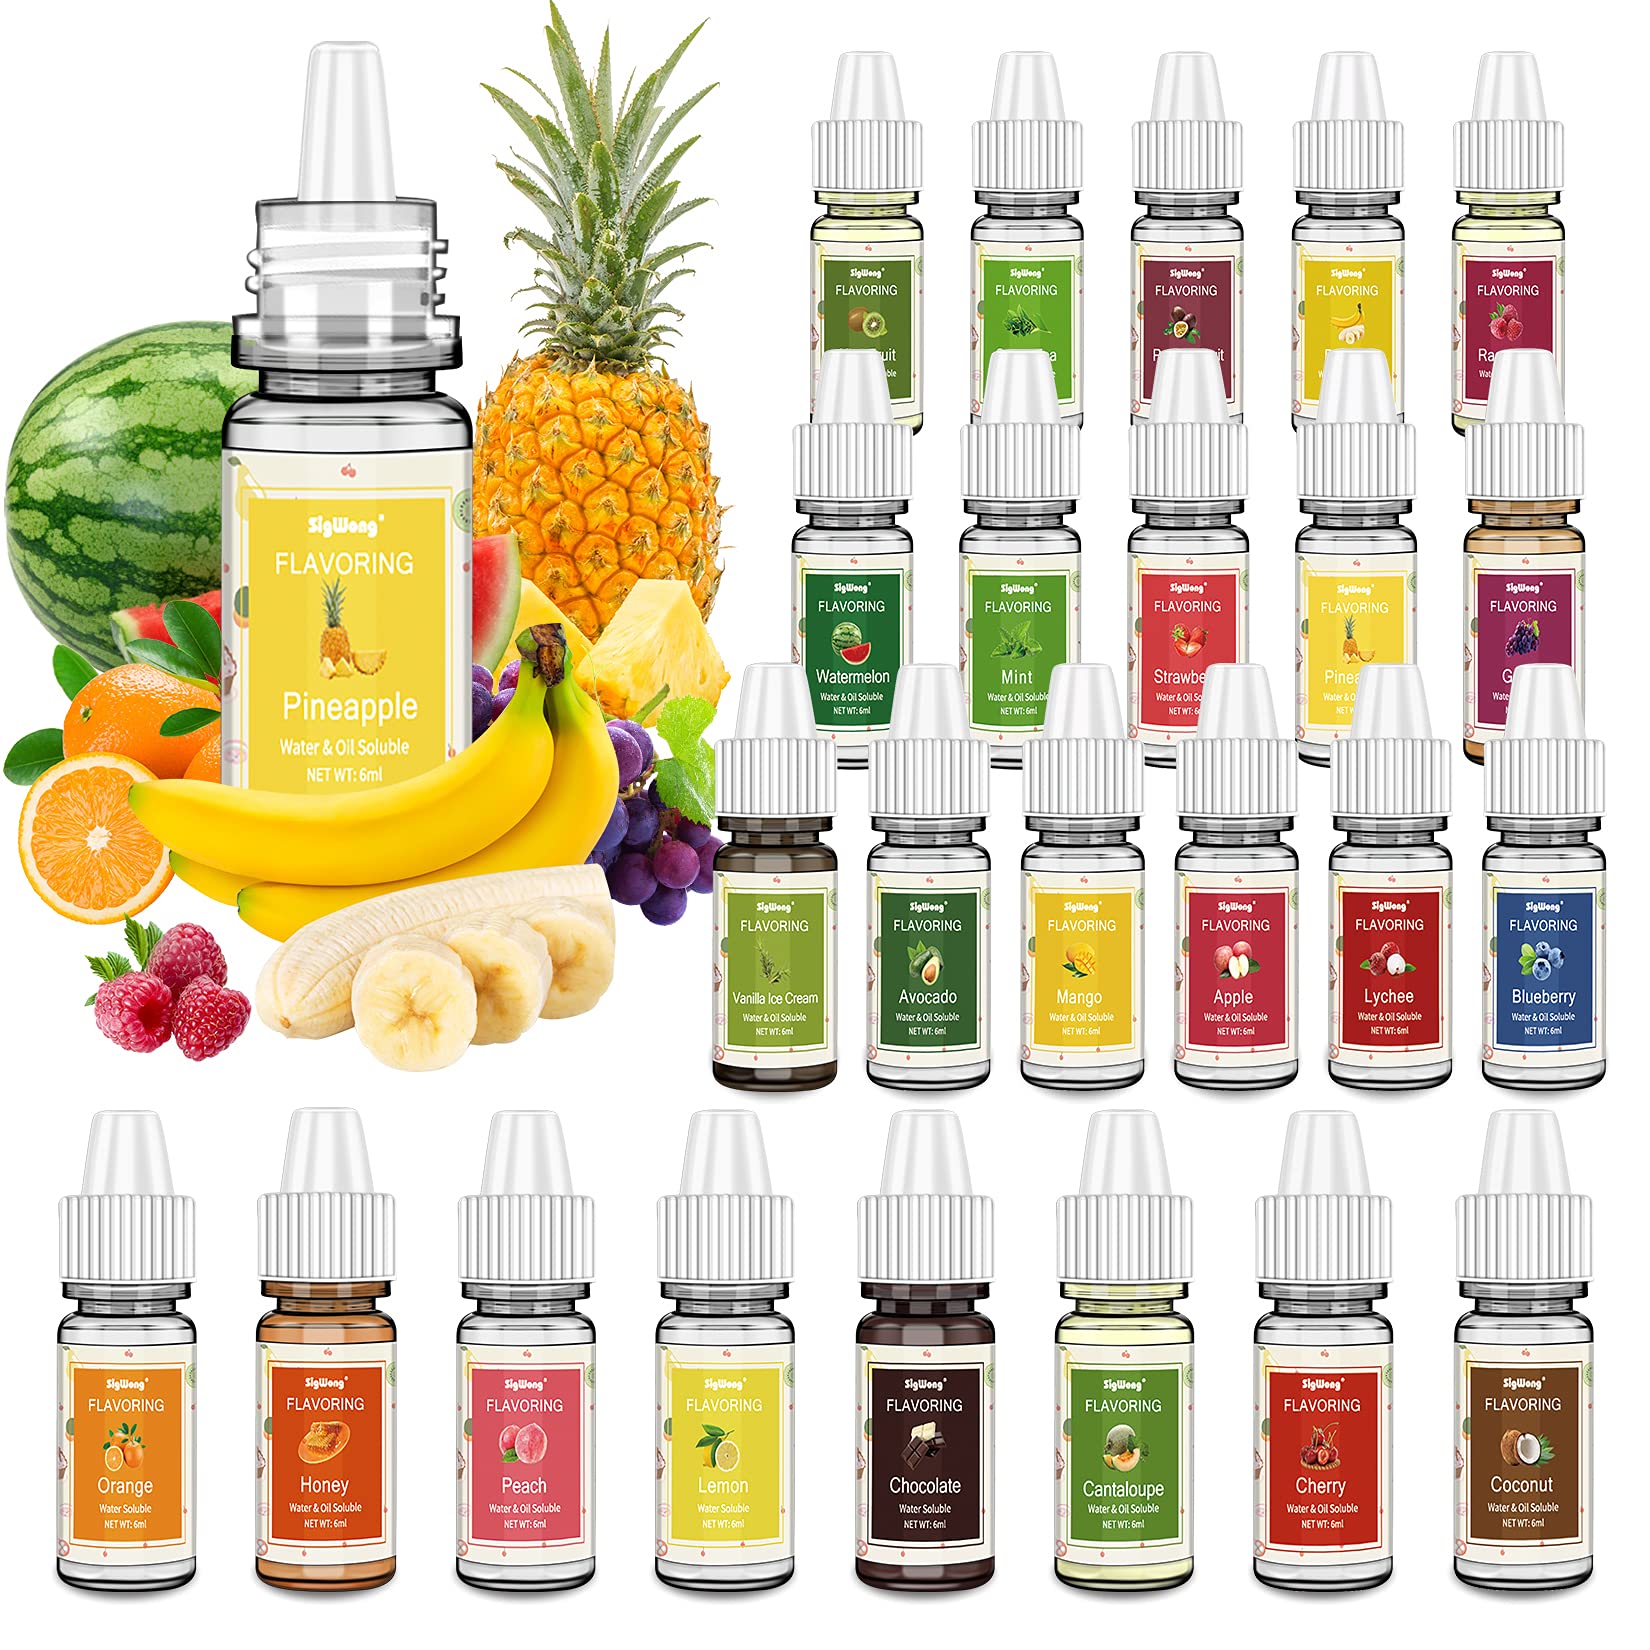 Pineapple Extract Oil Soluble 2 oz